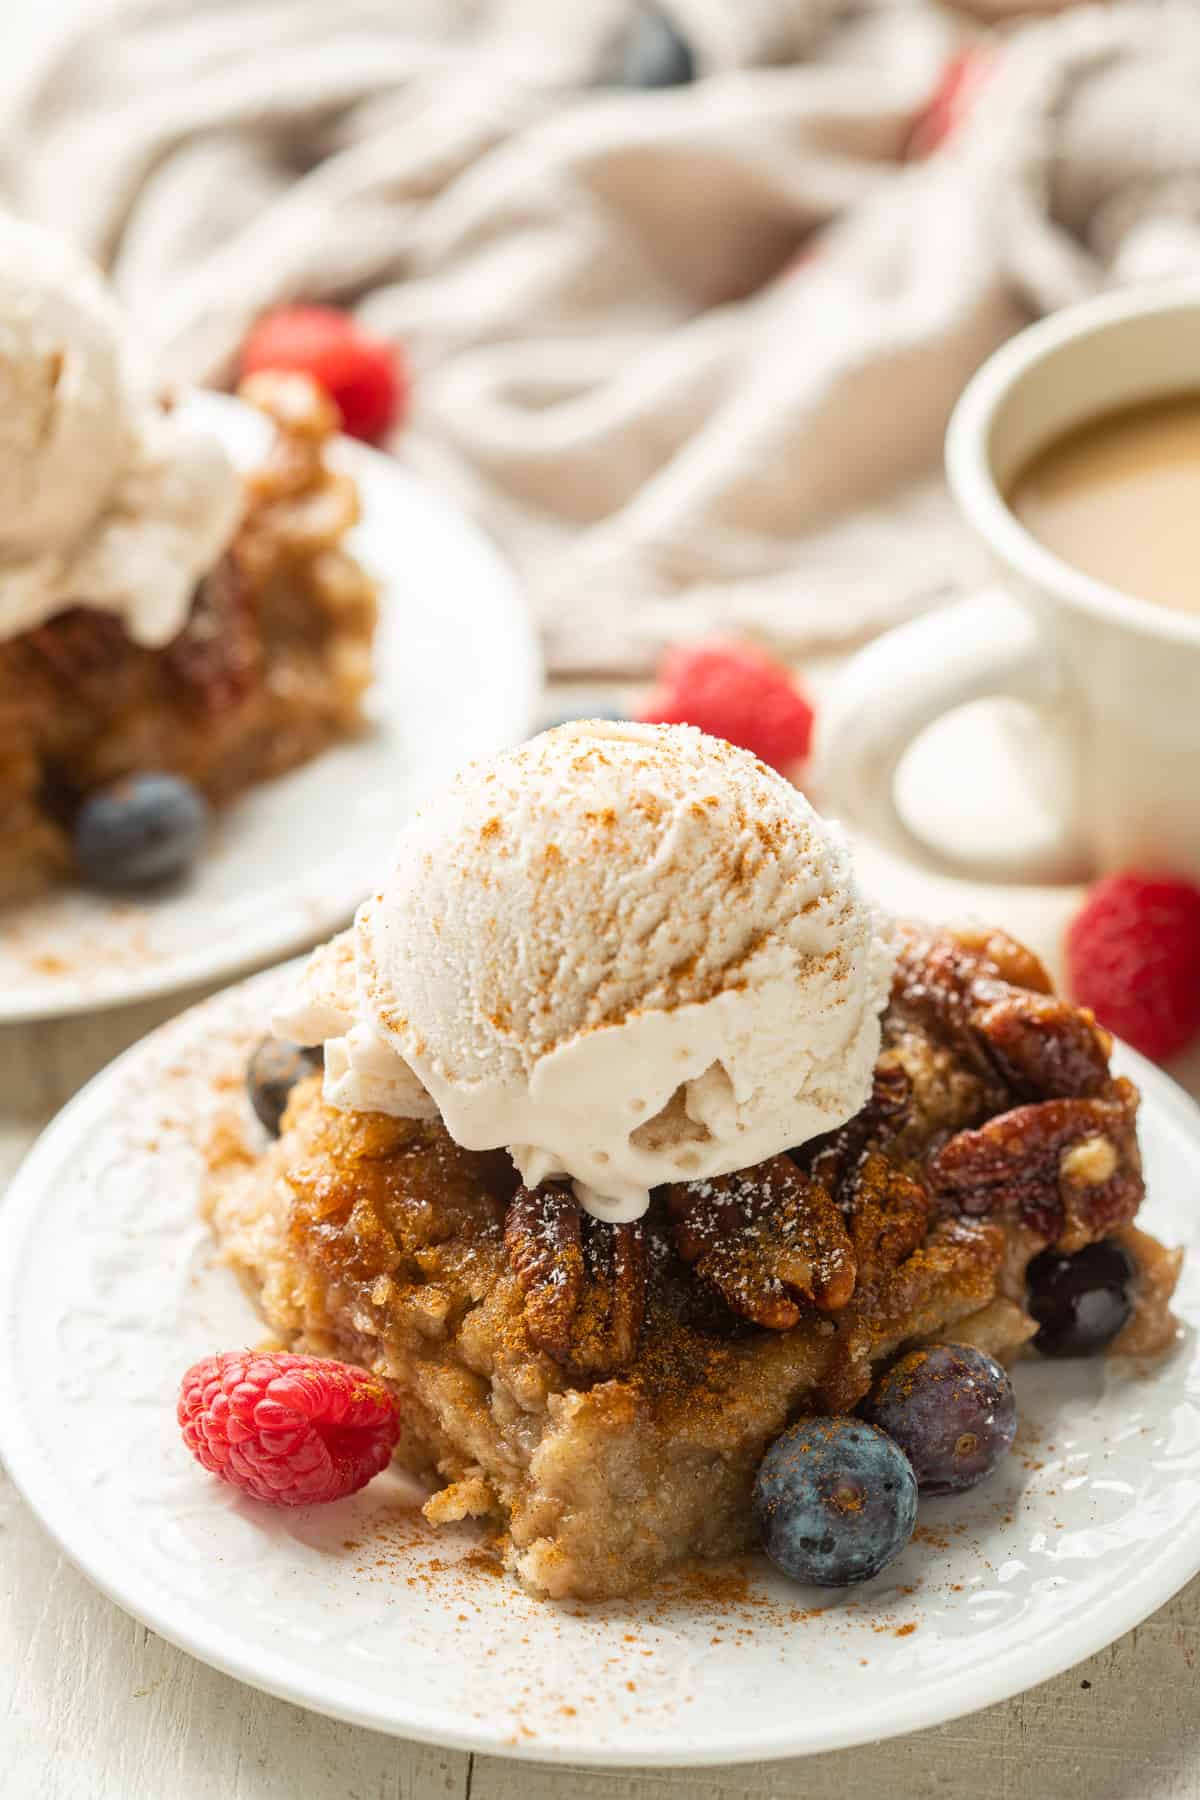 Slice of Vegan Bread Pudding on a plate with a scoop of ice cream on top.